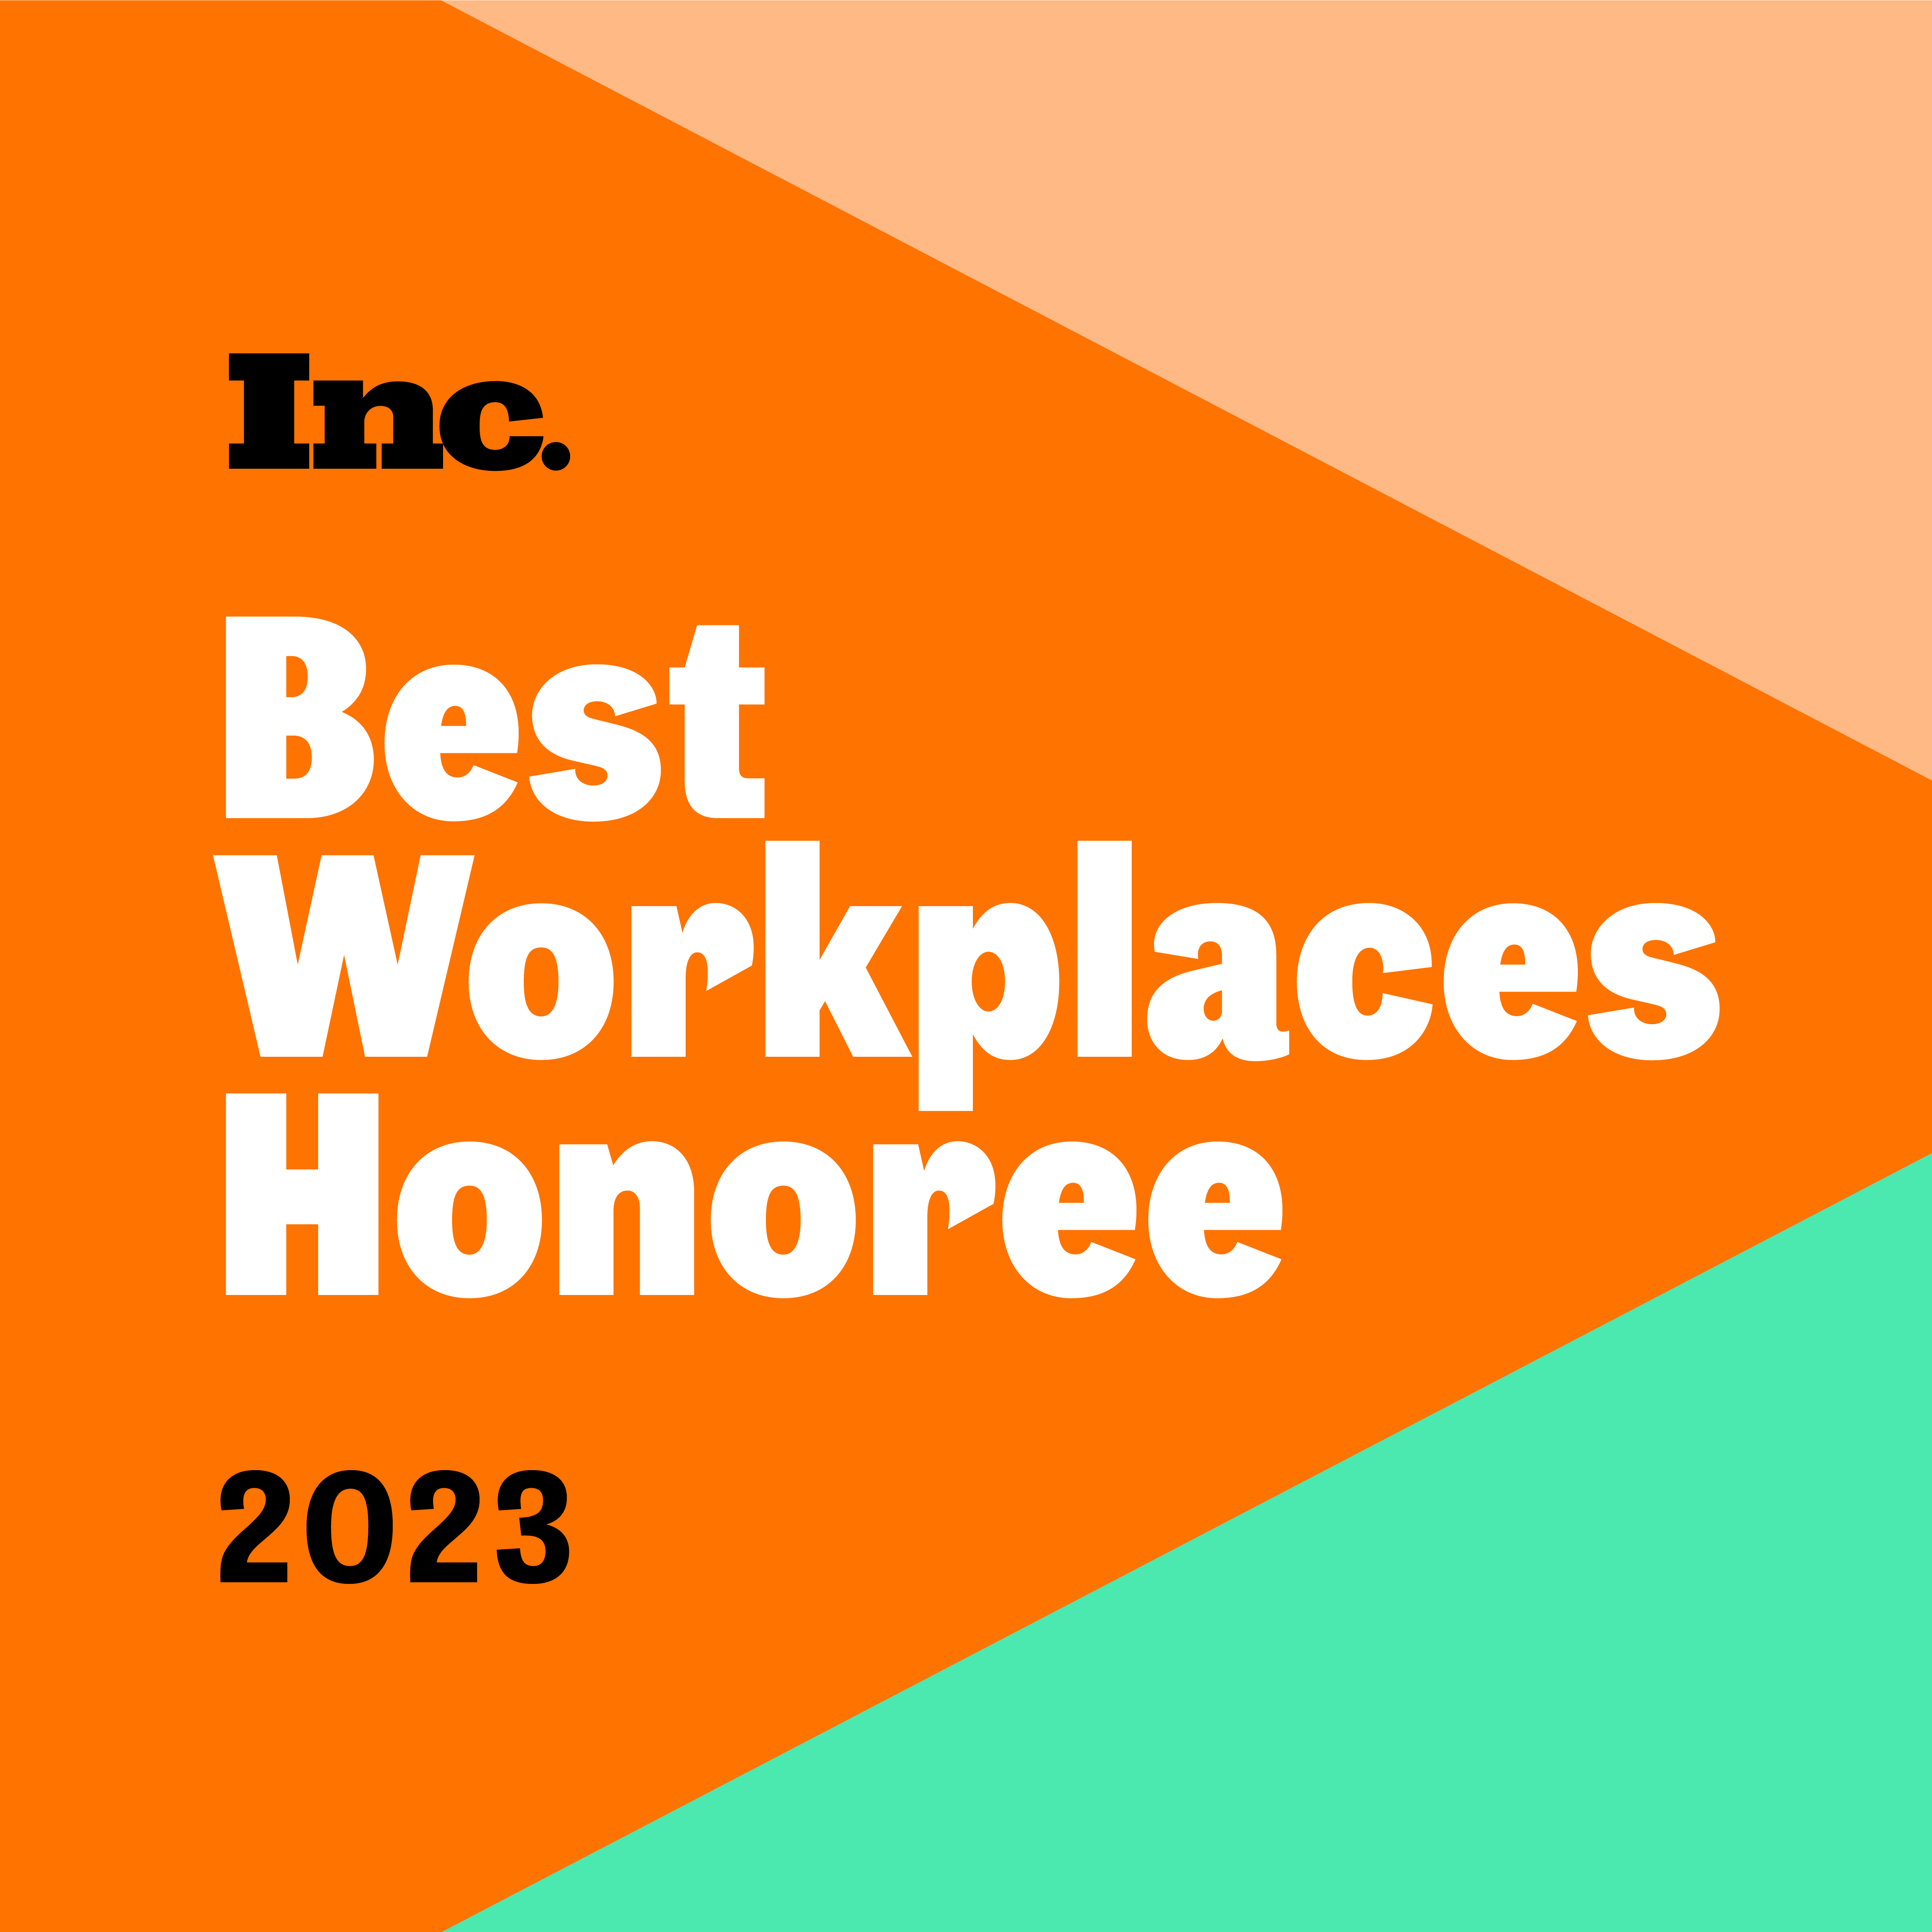 Thread Makes the 2023 Inc. Best Workplaces List